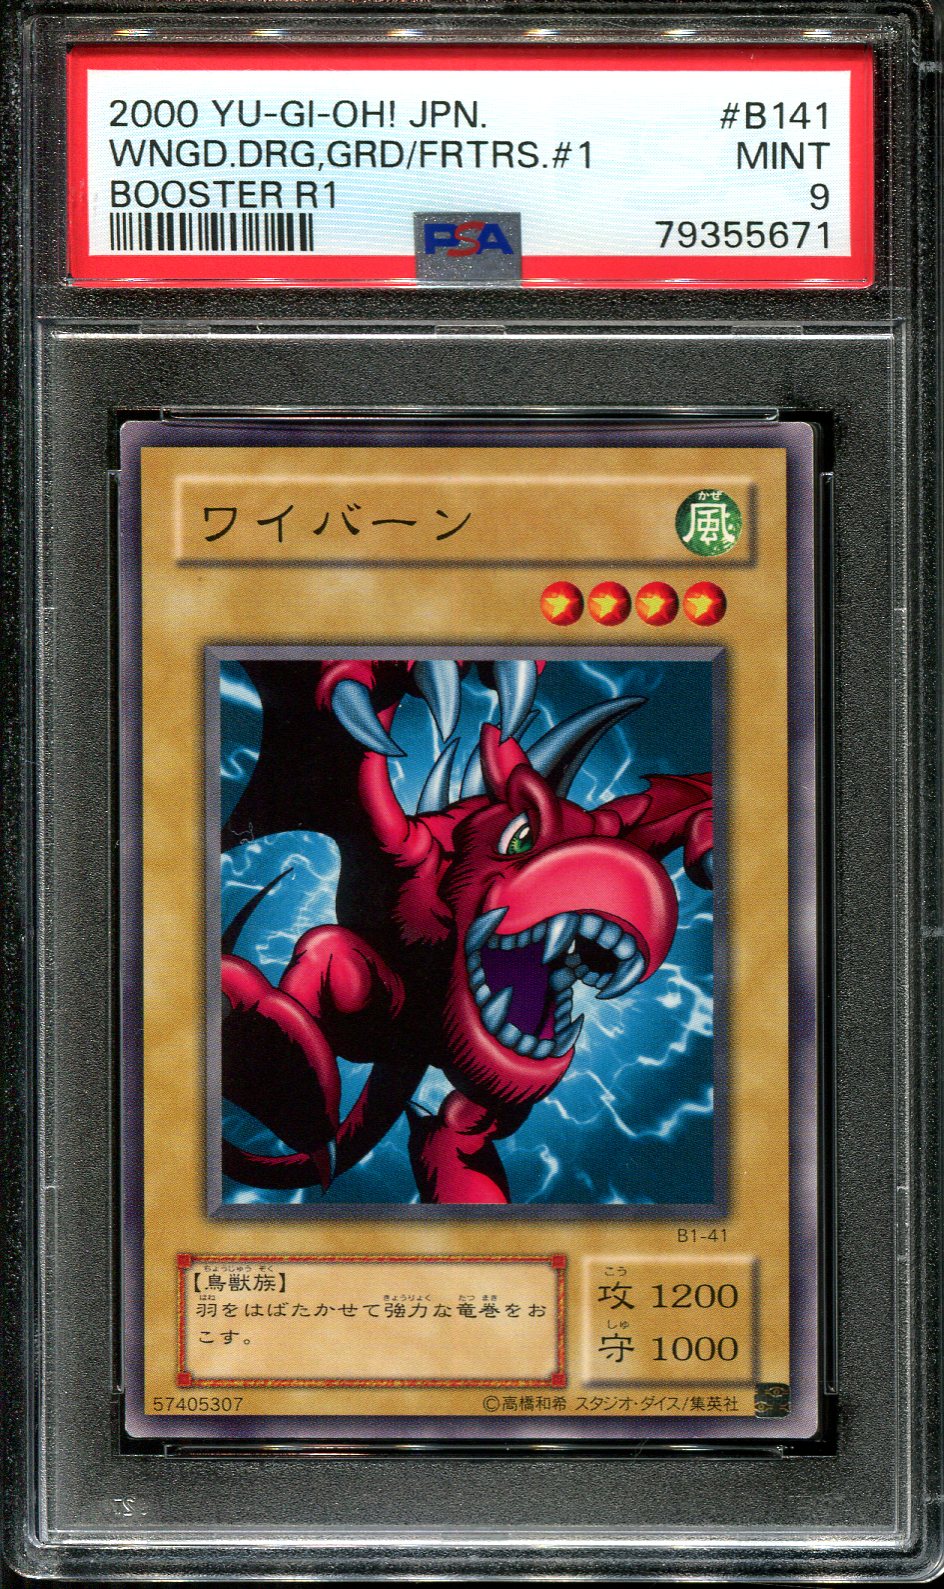 YUGIOH - PSA 9 - WINGED DRAGON GUARDIAN OF THE FORETRESS - B1-41 - BOOSTER R1 JAPANESE OCG